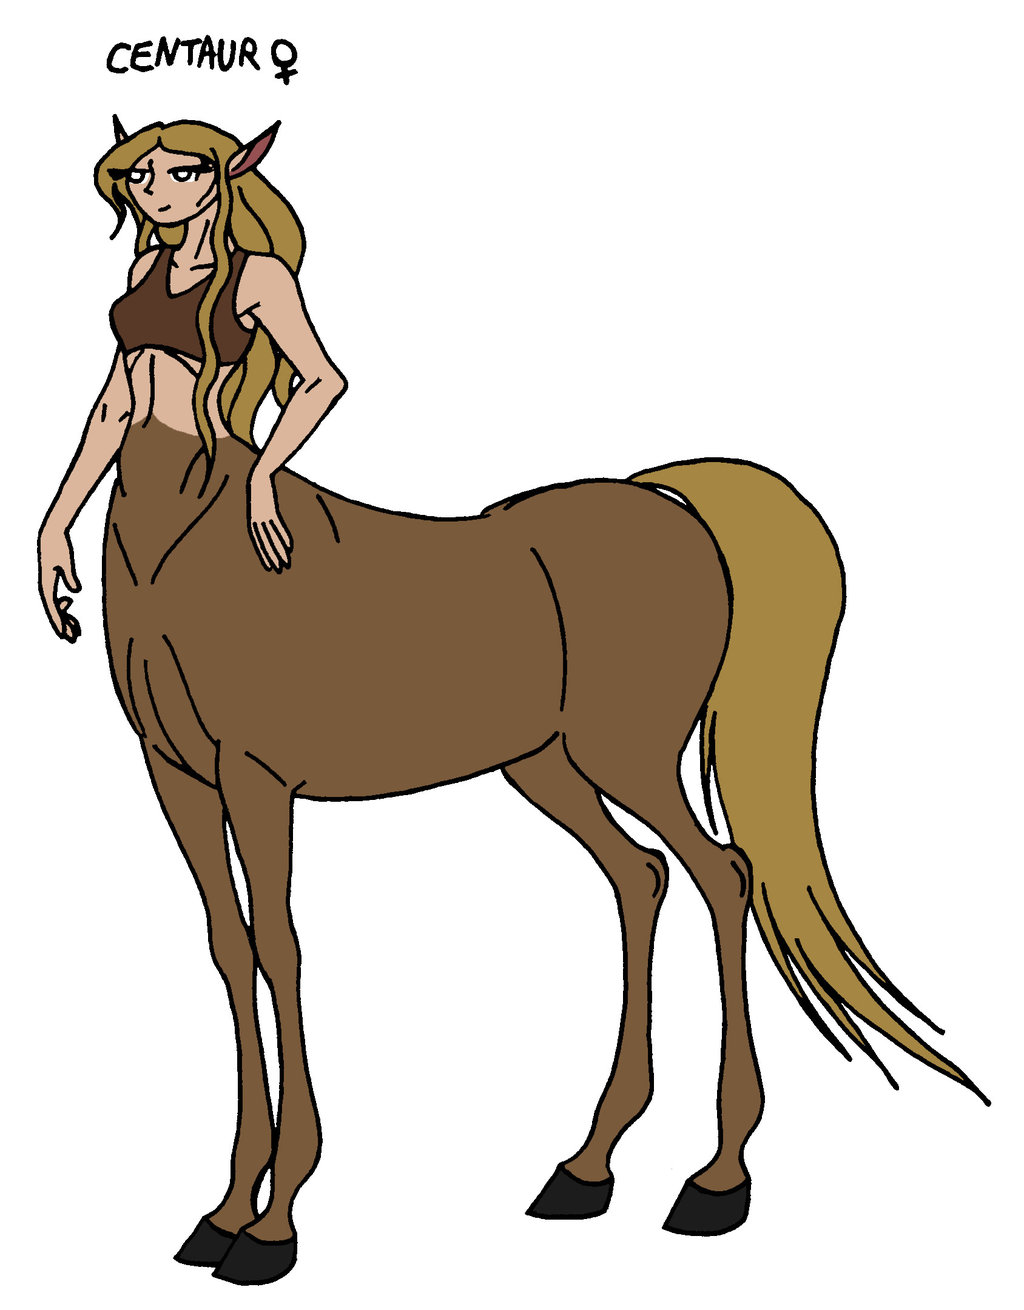 Centaur Narnia Images & Pictures - Becuo